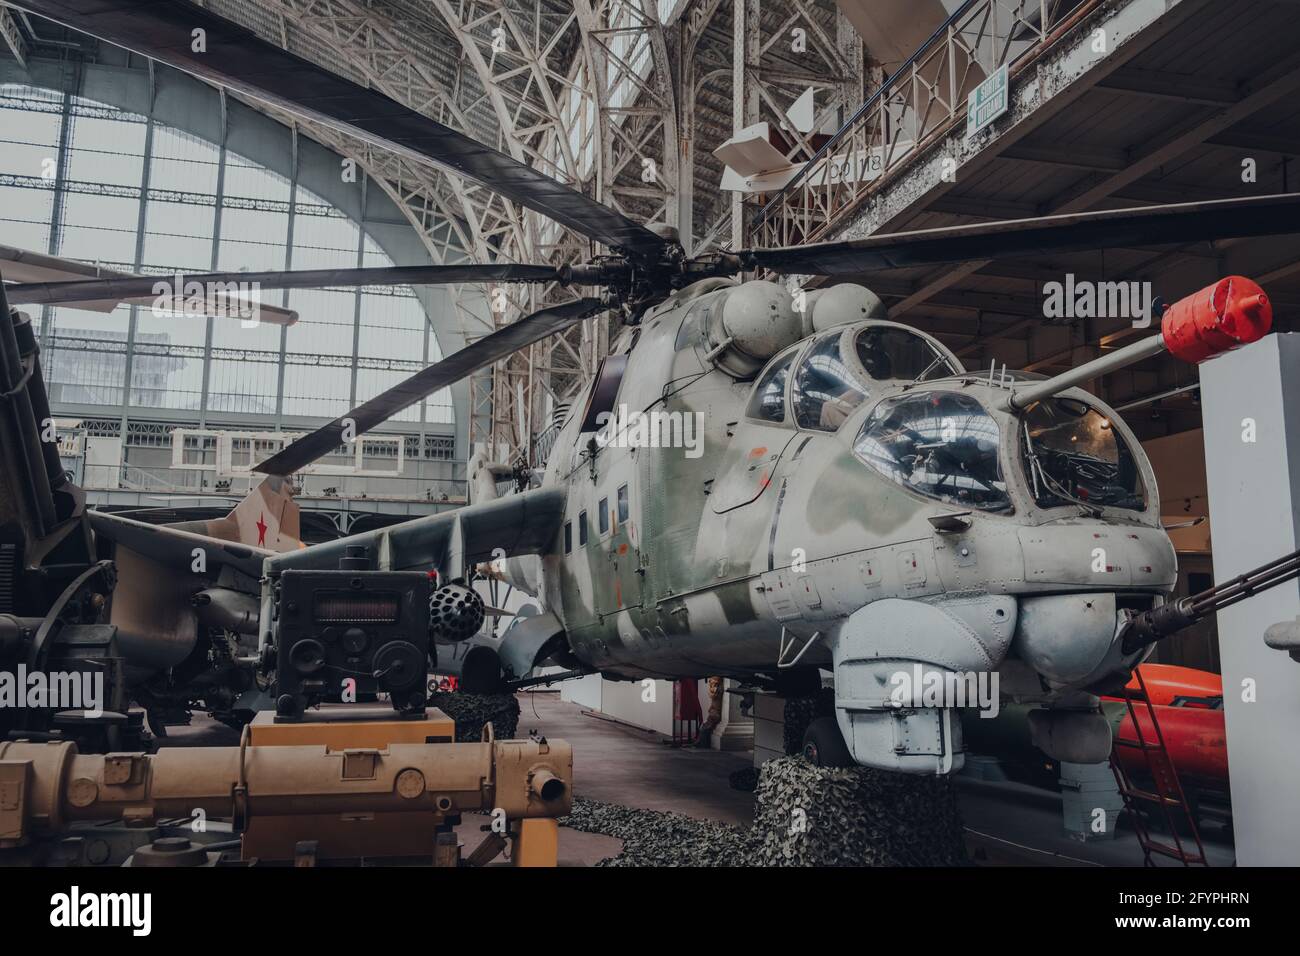 Brussels, Belgium - August 17, 2019: Mil Mi-24D HIND-D attack helicopter in The Royal Museum of the Armed Forces and Military History, famous military Stock Photo